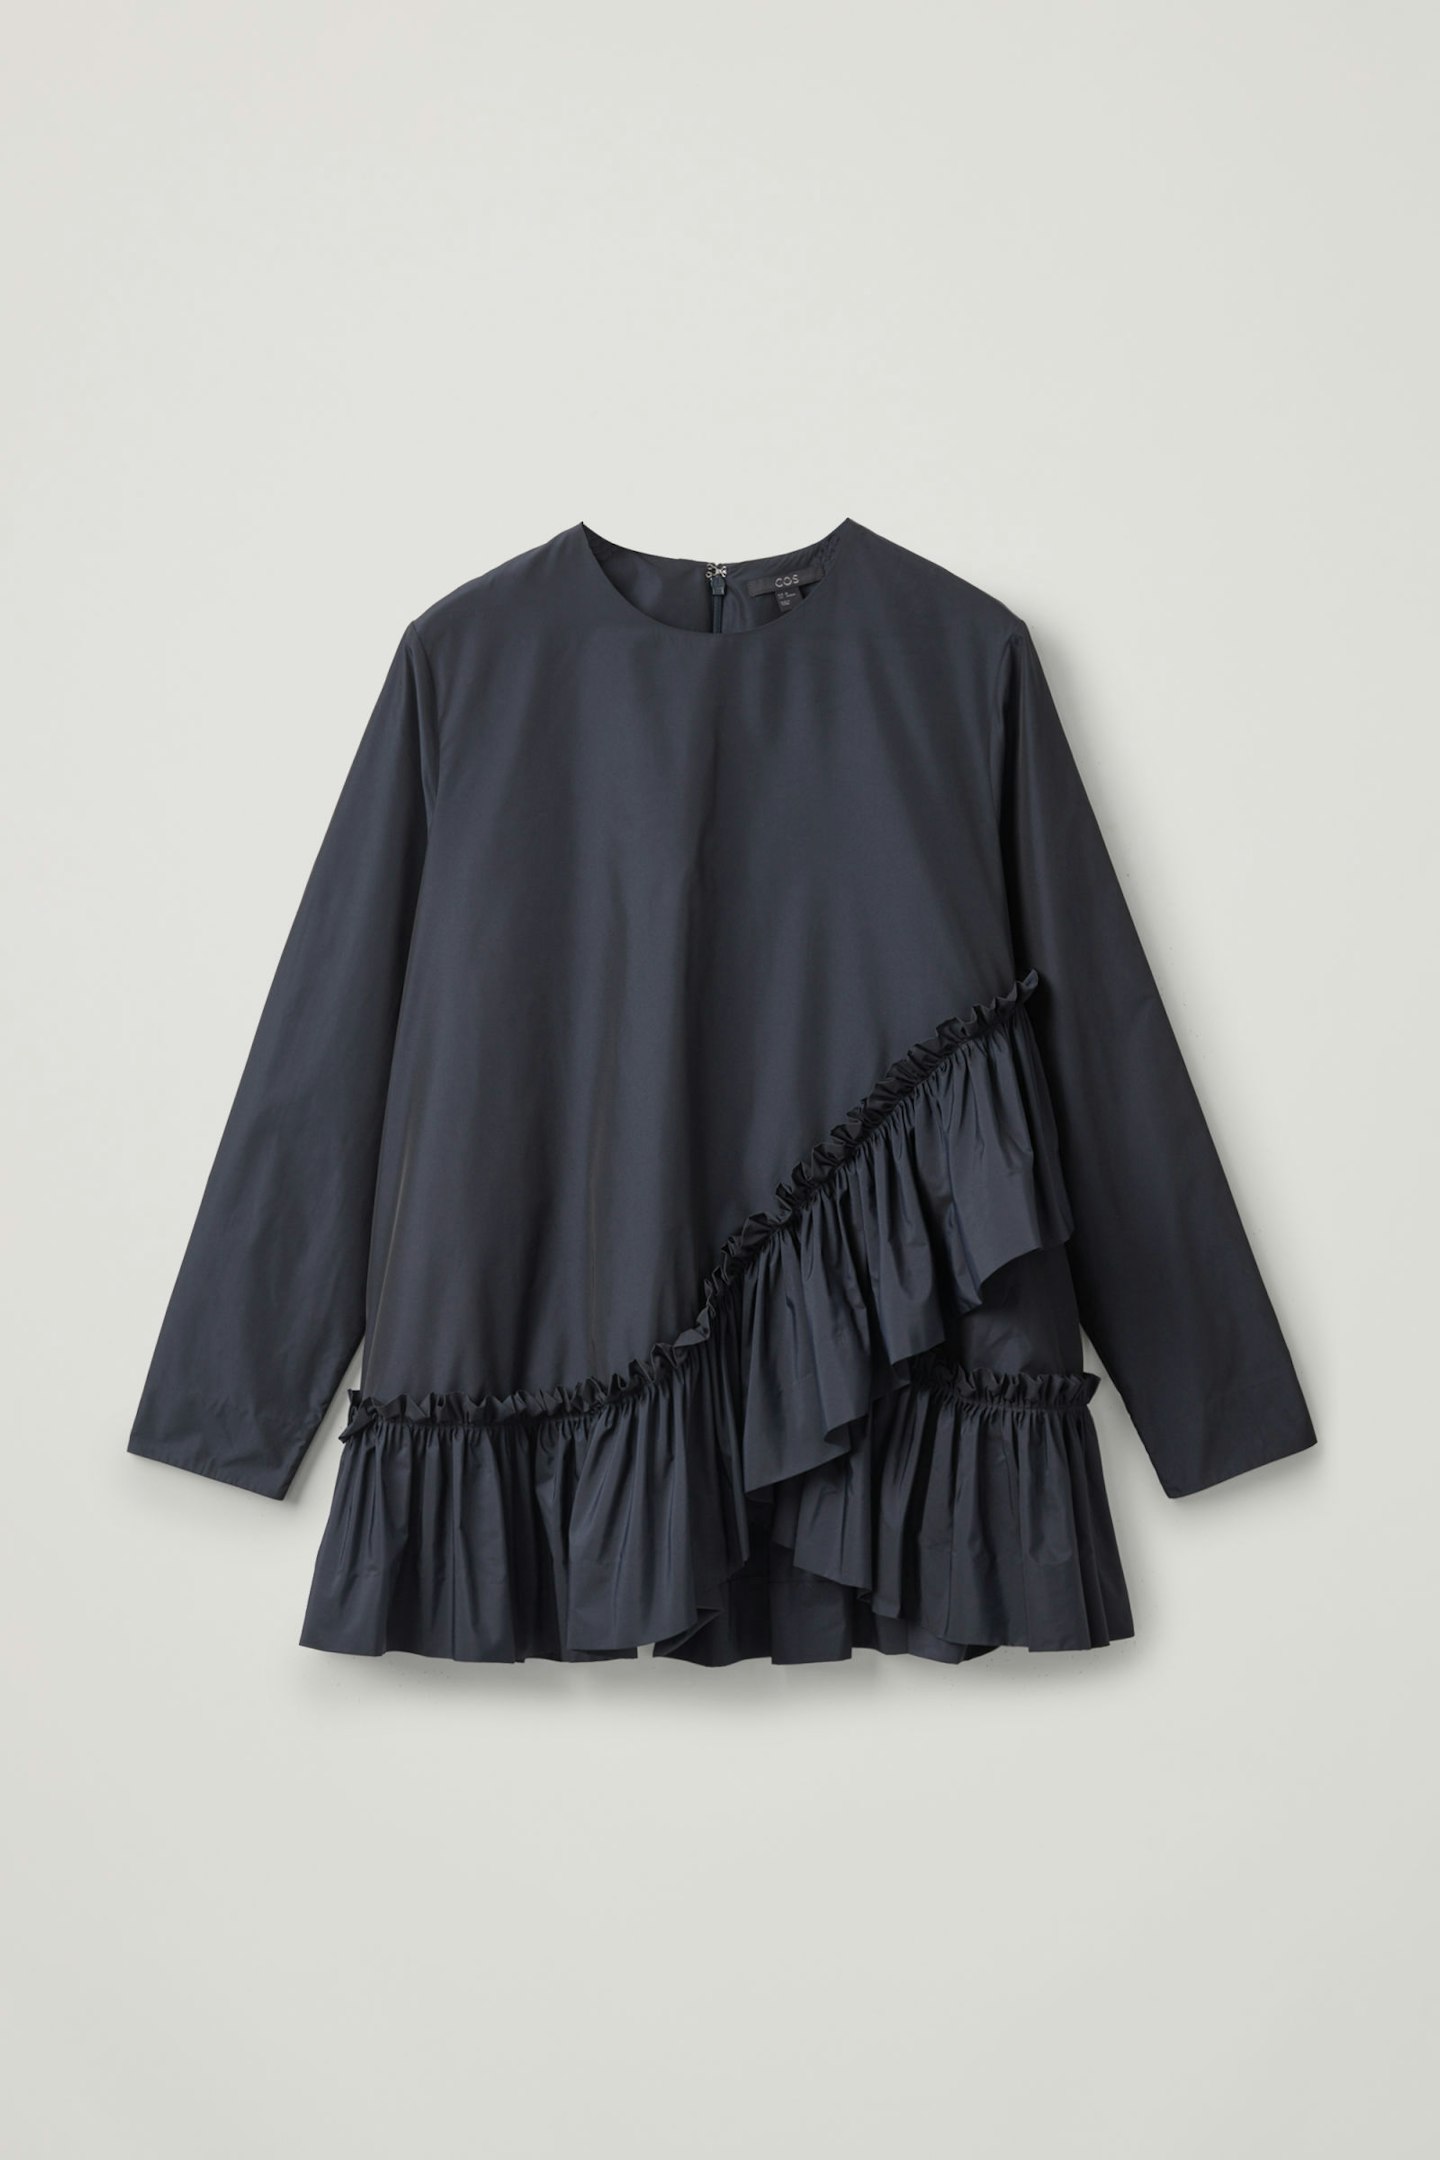 Cos, Frilled Nylon Top, £59